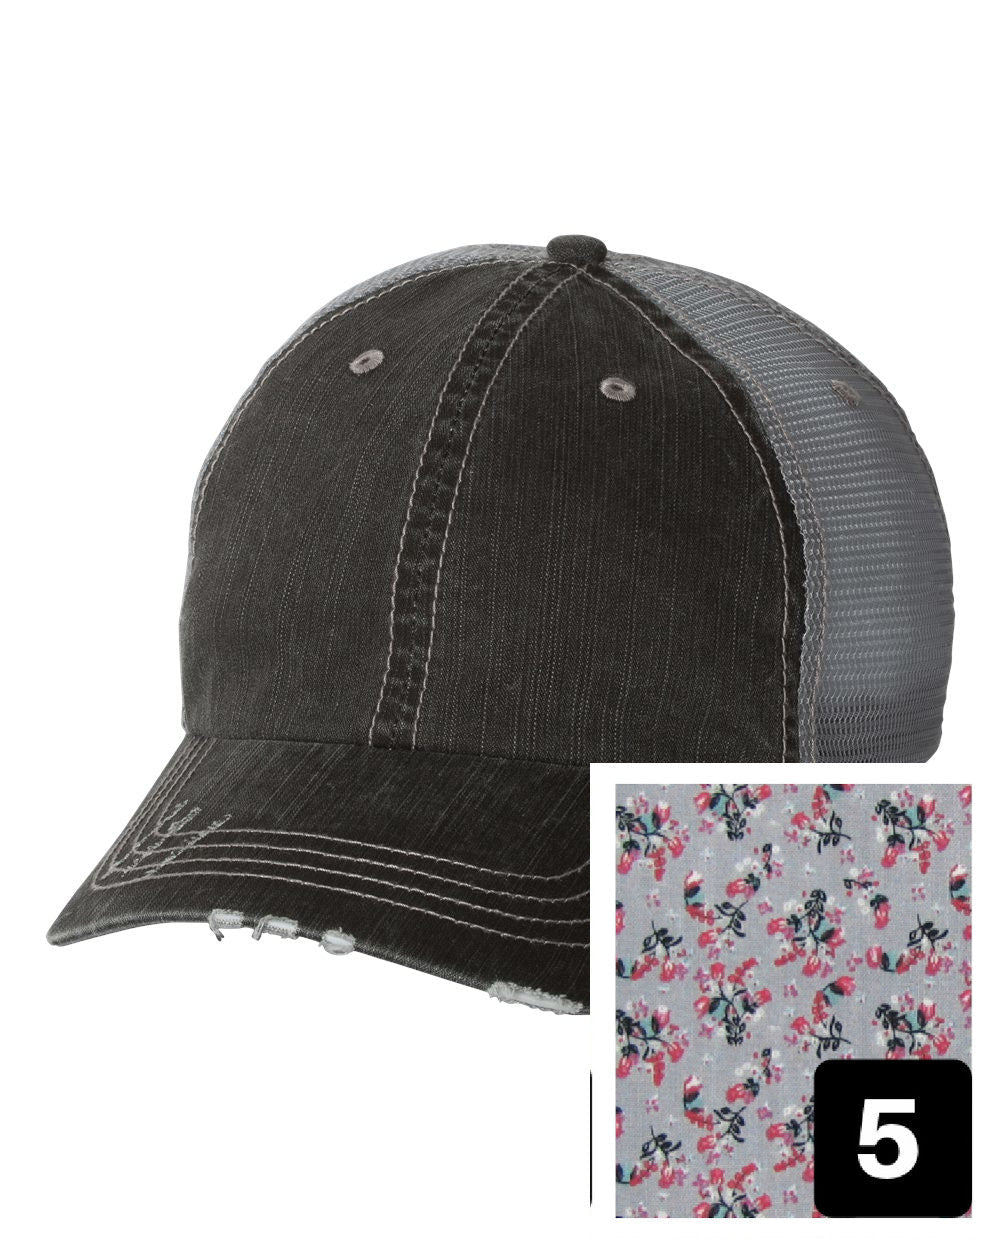 gray distressed trucker hat with purple and pink floral fabric state of Texas